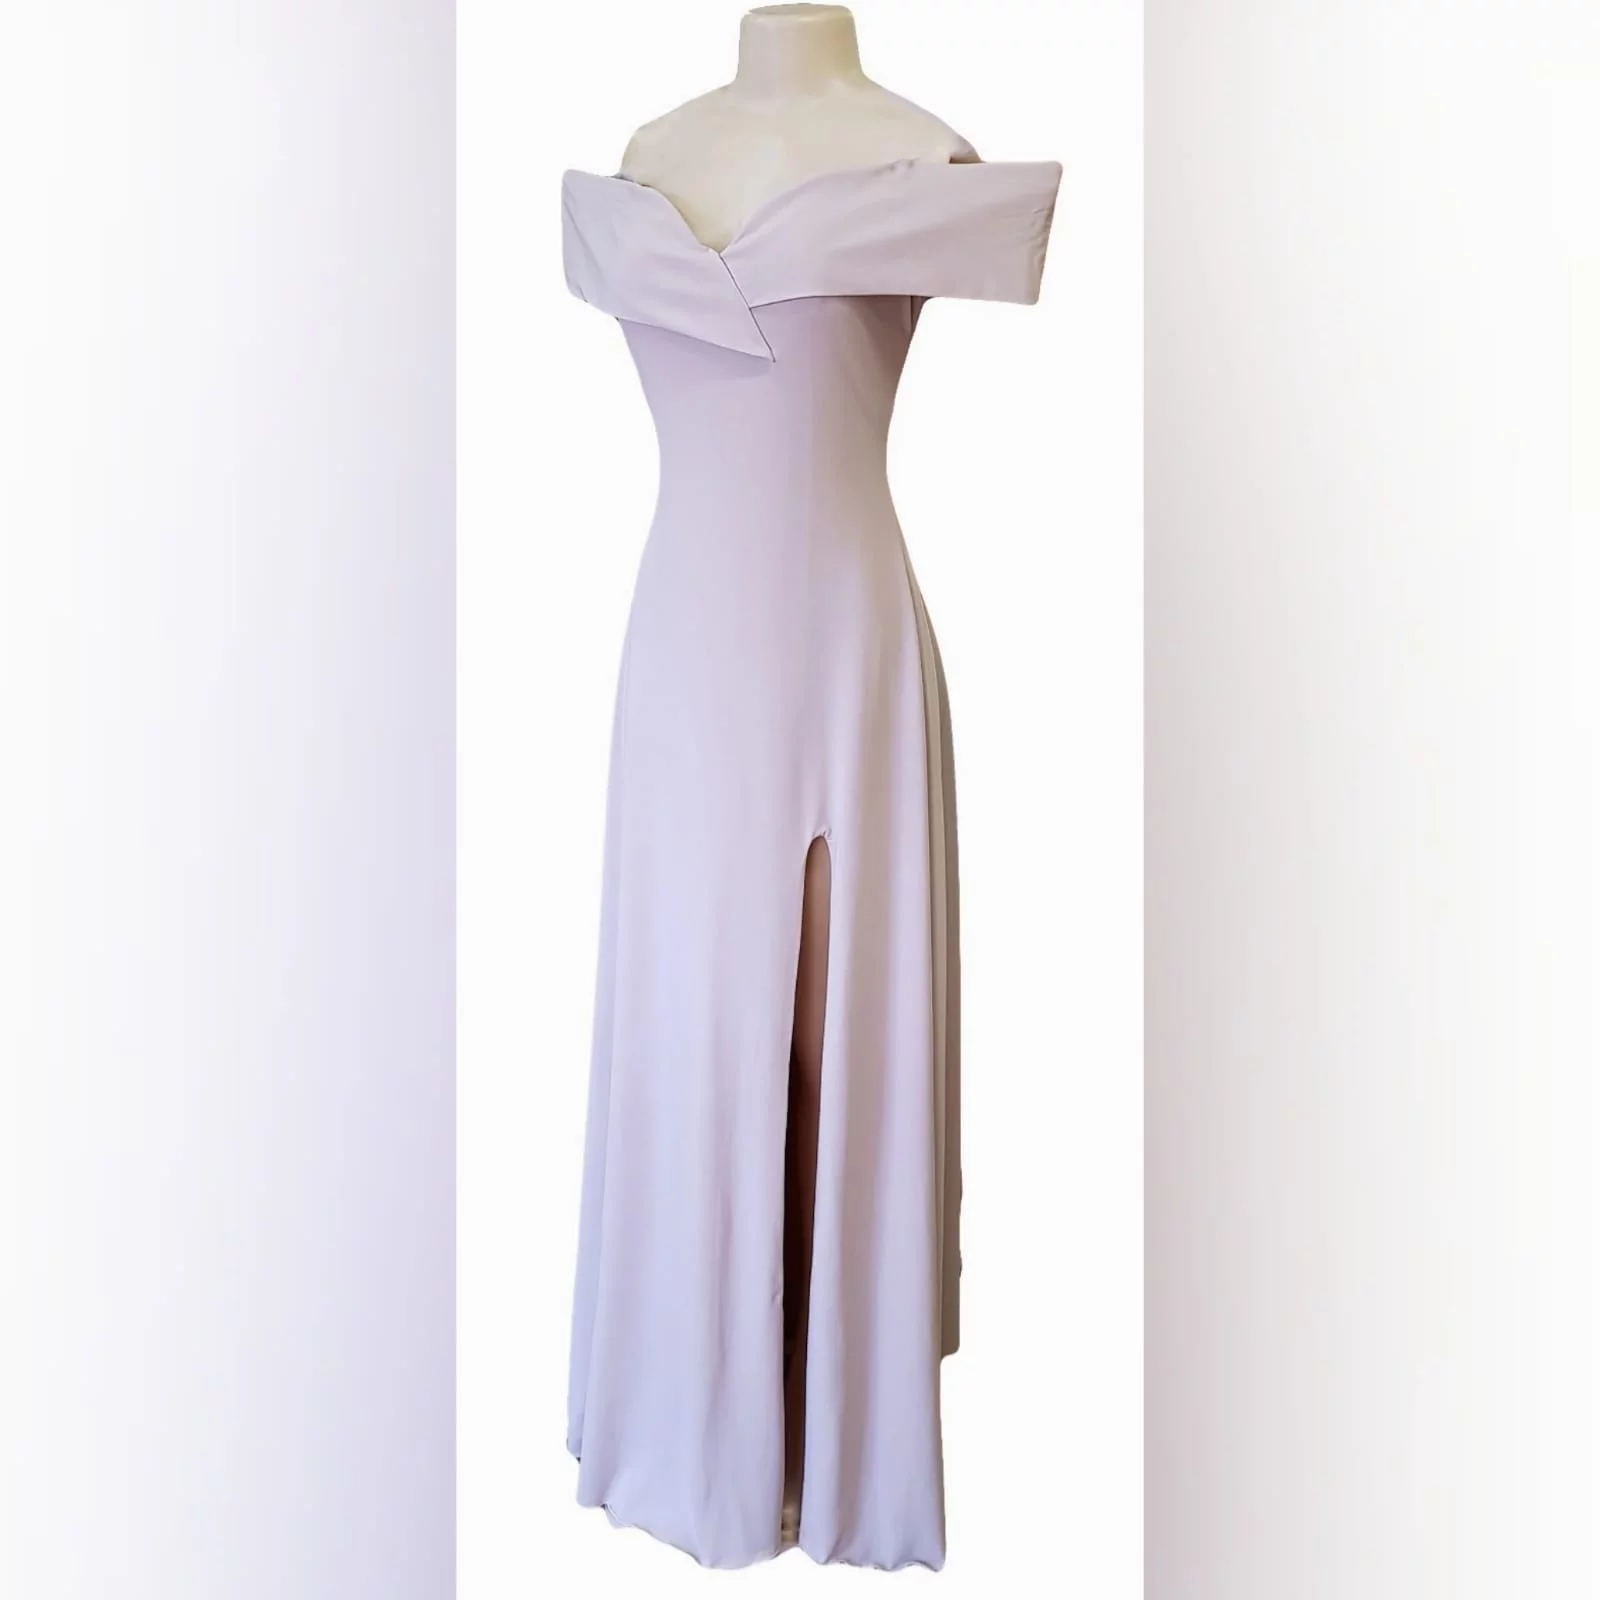 Simple elegant nude long prom dress 7 <blockquote>"always be a first rate version of yourself and not a second rate version of someone else" judy garland</blockquote> simple elegant nude long prom dress with an off shoulder cross bust neckline and a slit. A gorgeous design that can be worn to several occasions due to its simplicity.